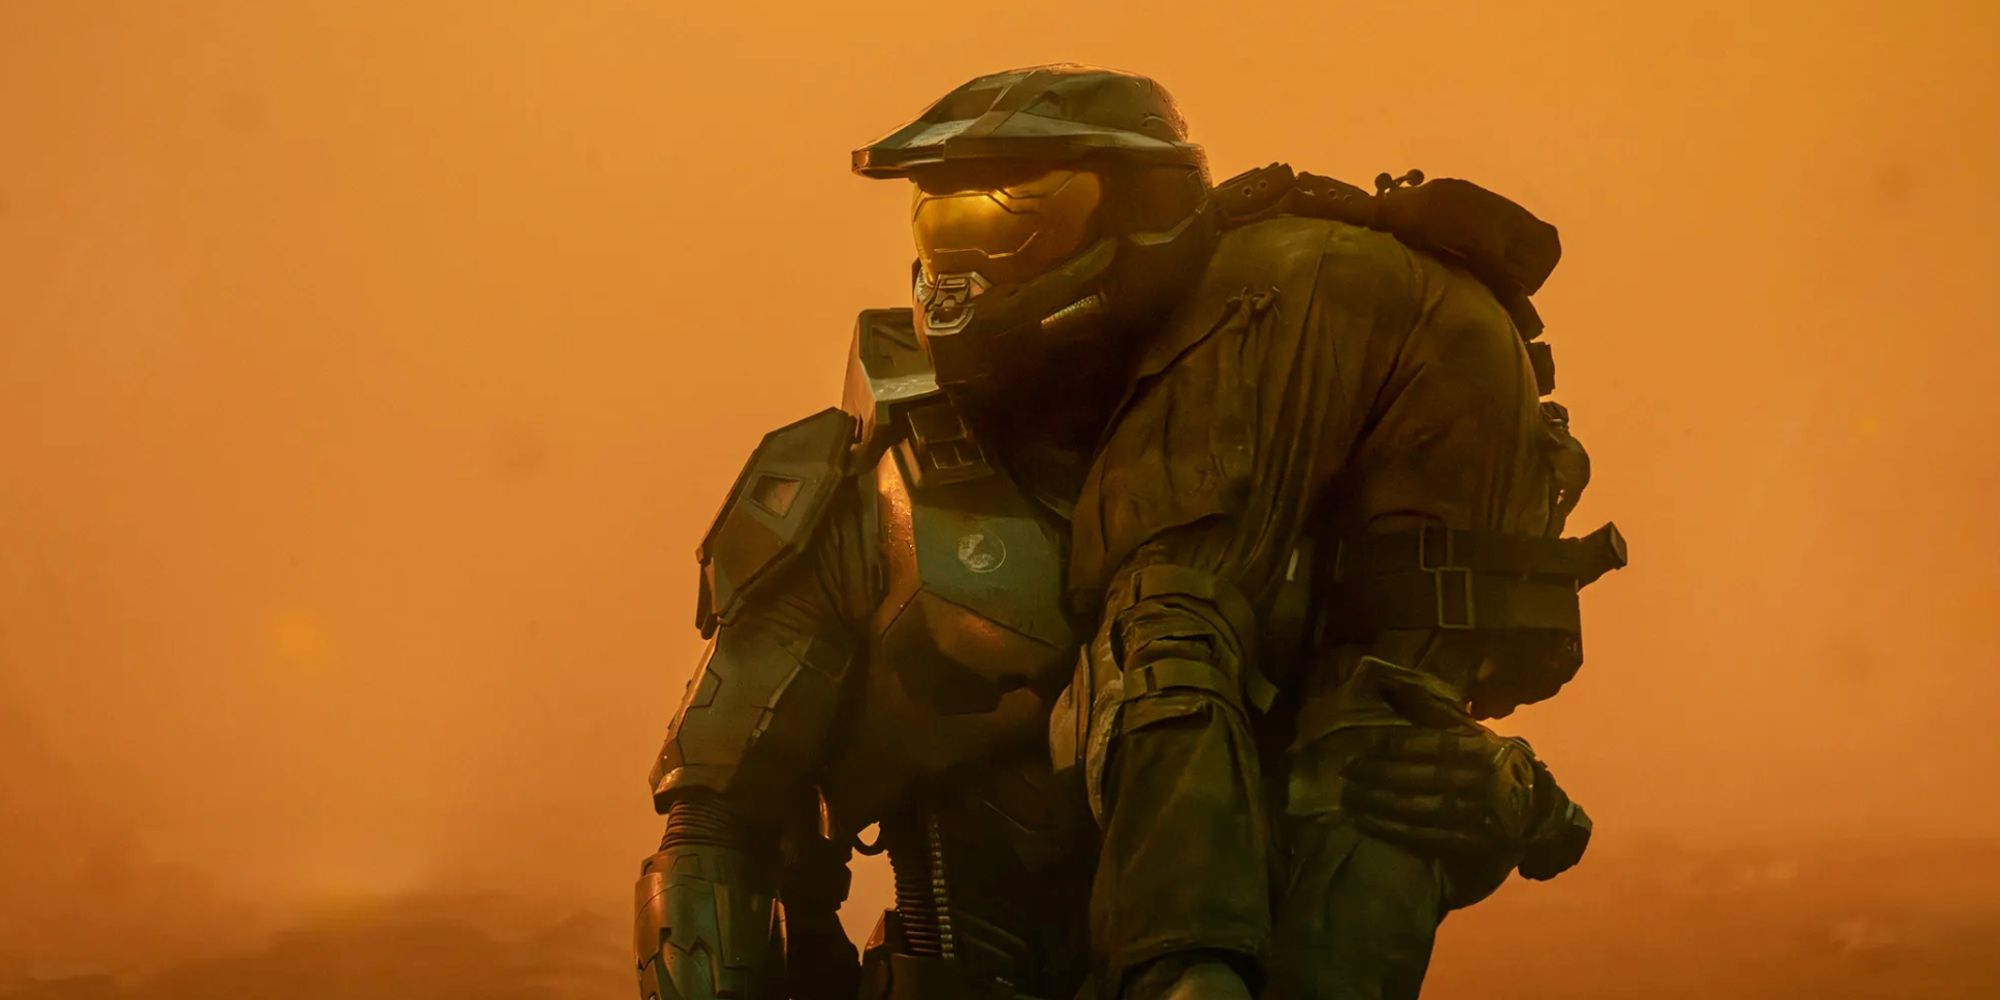 Halo Season 2 Makes A Strong Case For Its Most Controversial Season 1 Decision